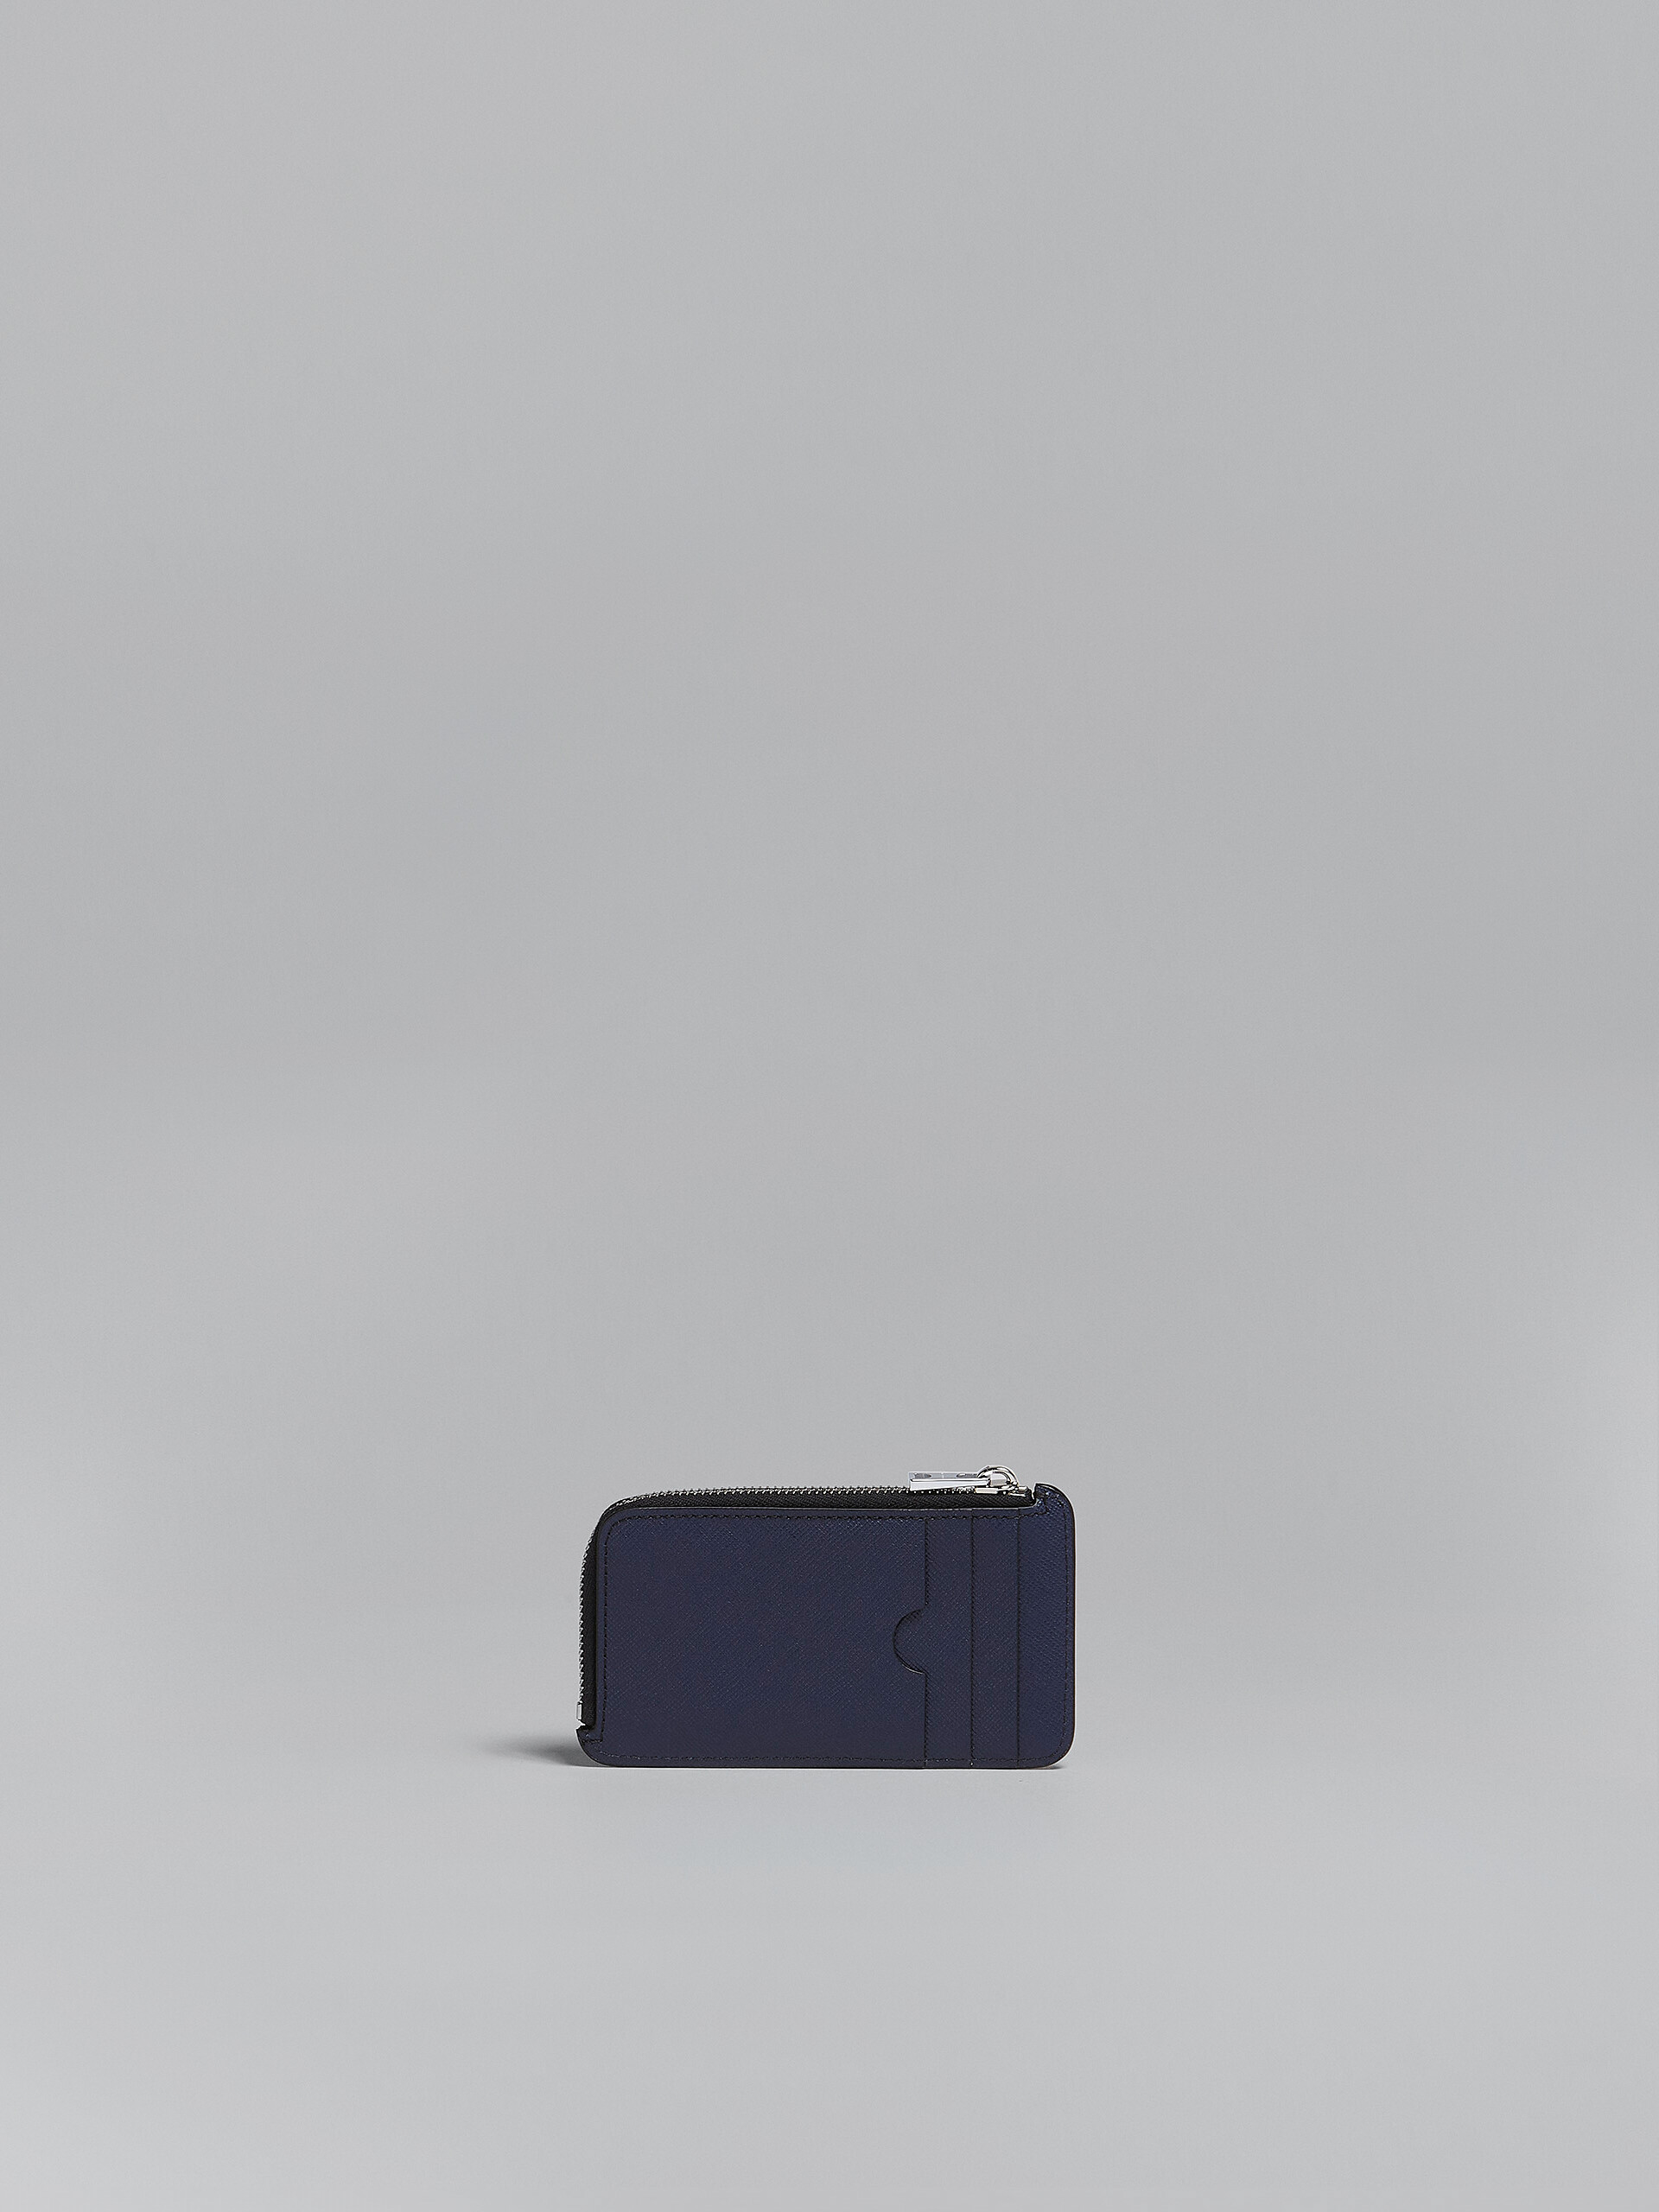 Blue Leather Zip Wallet with card holder